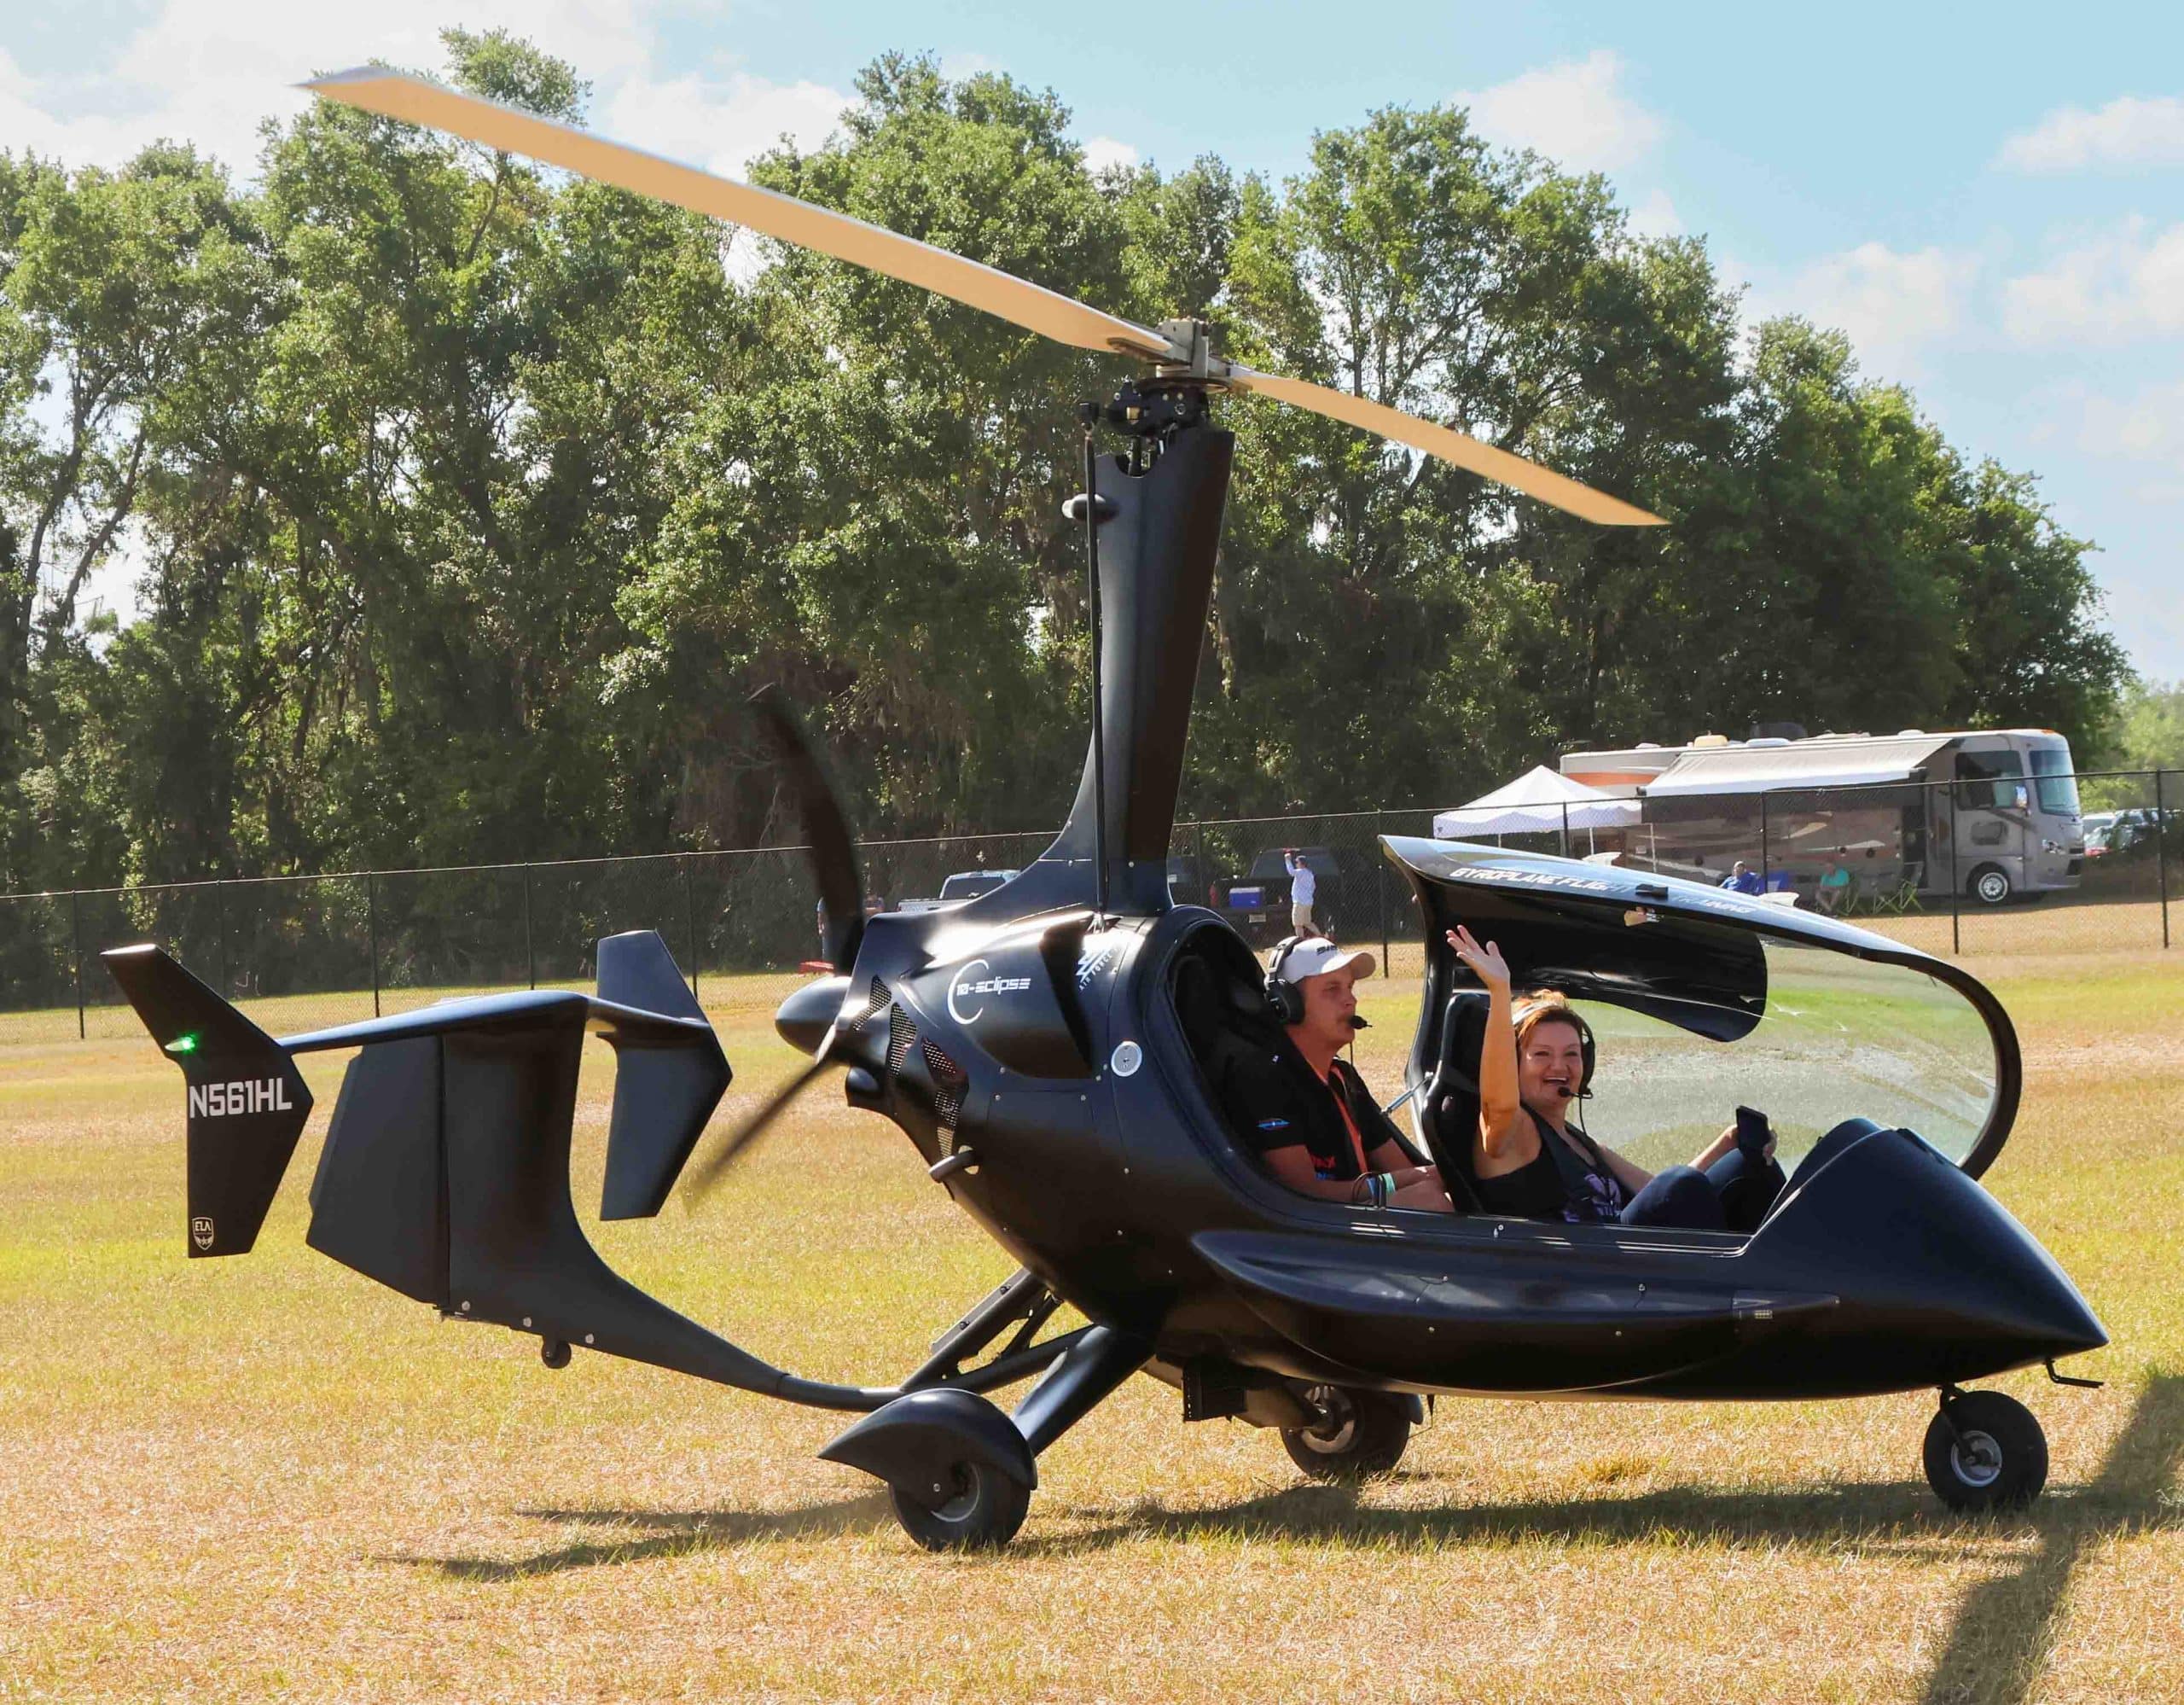 A lucky visitor takes an orientation flight in a Gyrocopter. Photo credit: Mark Stone